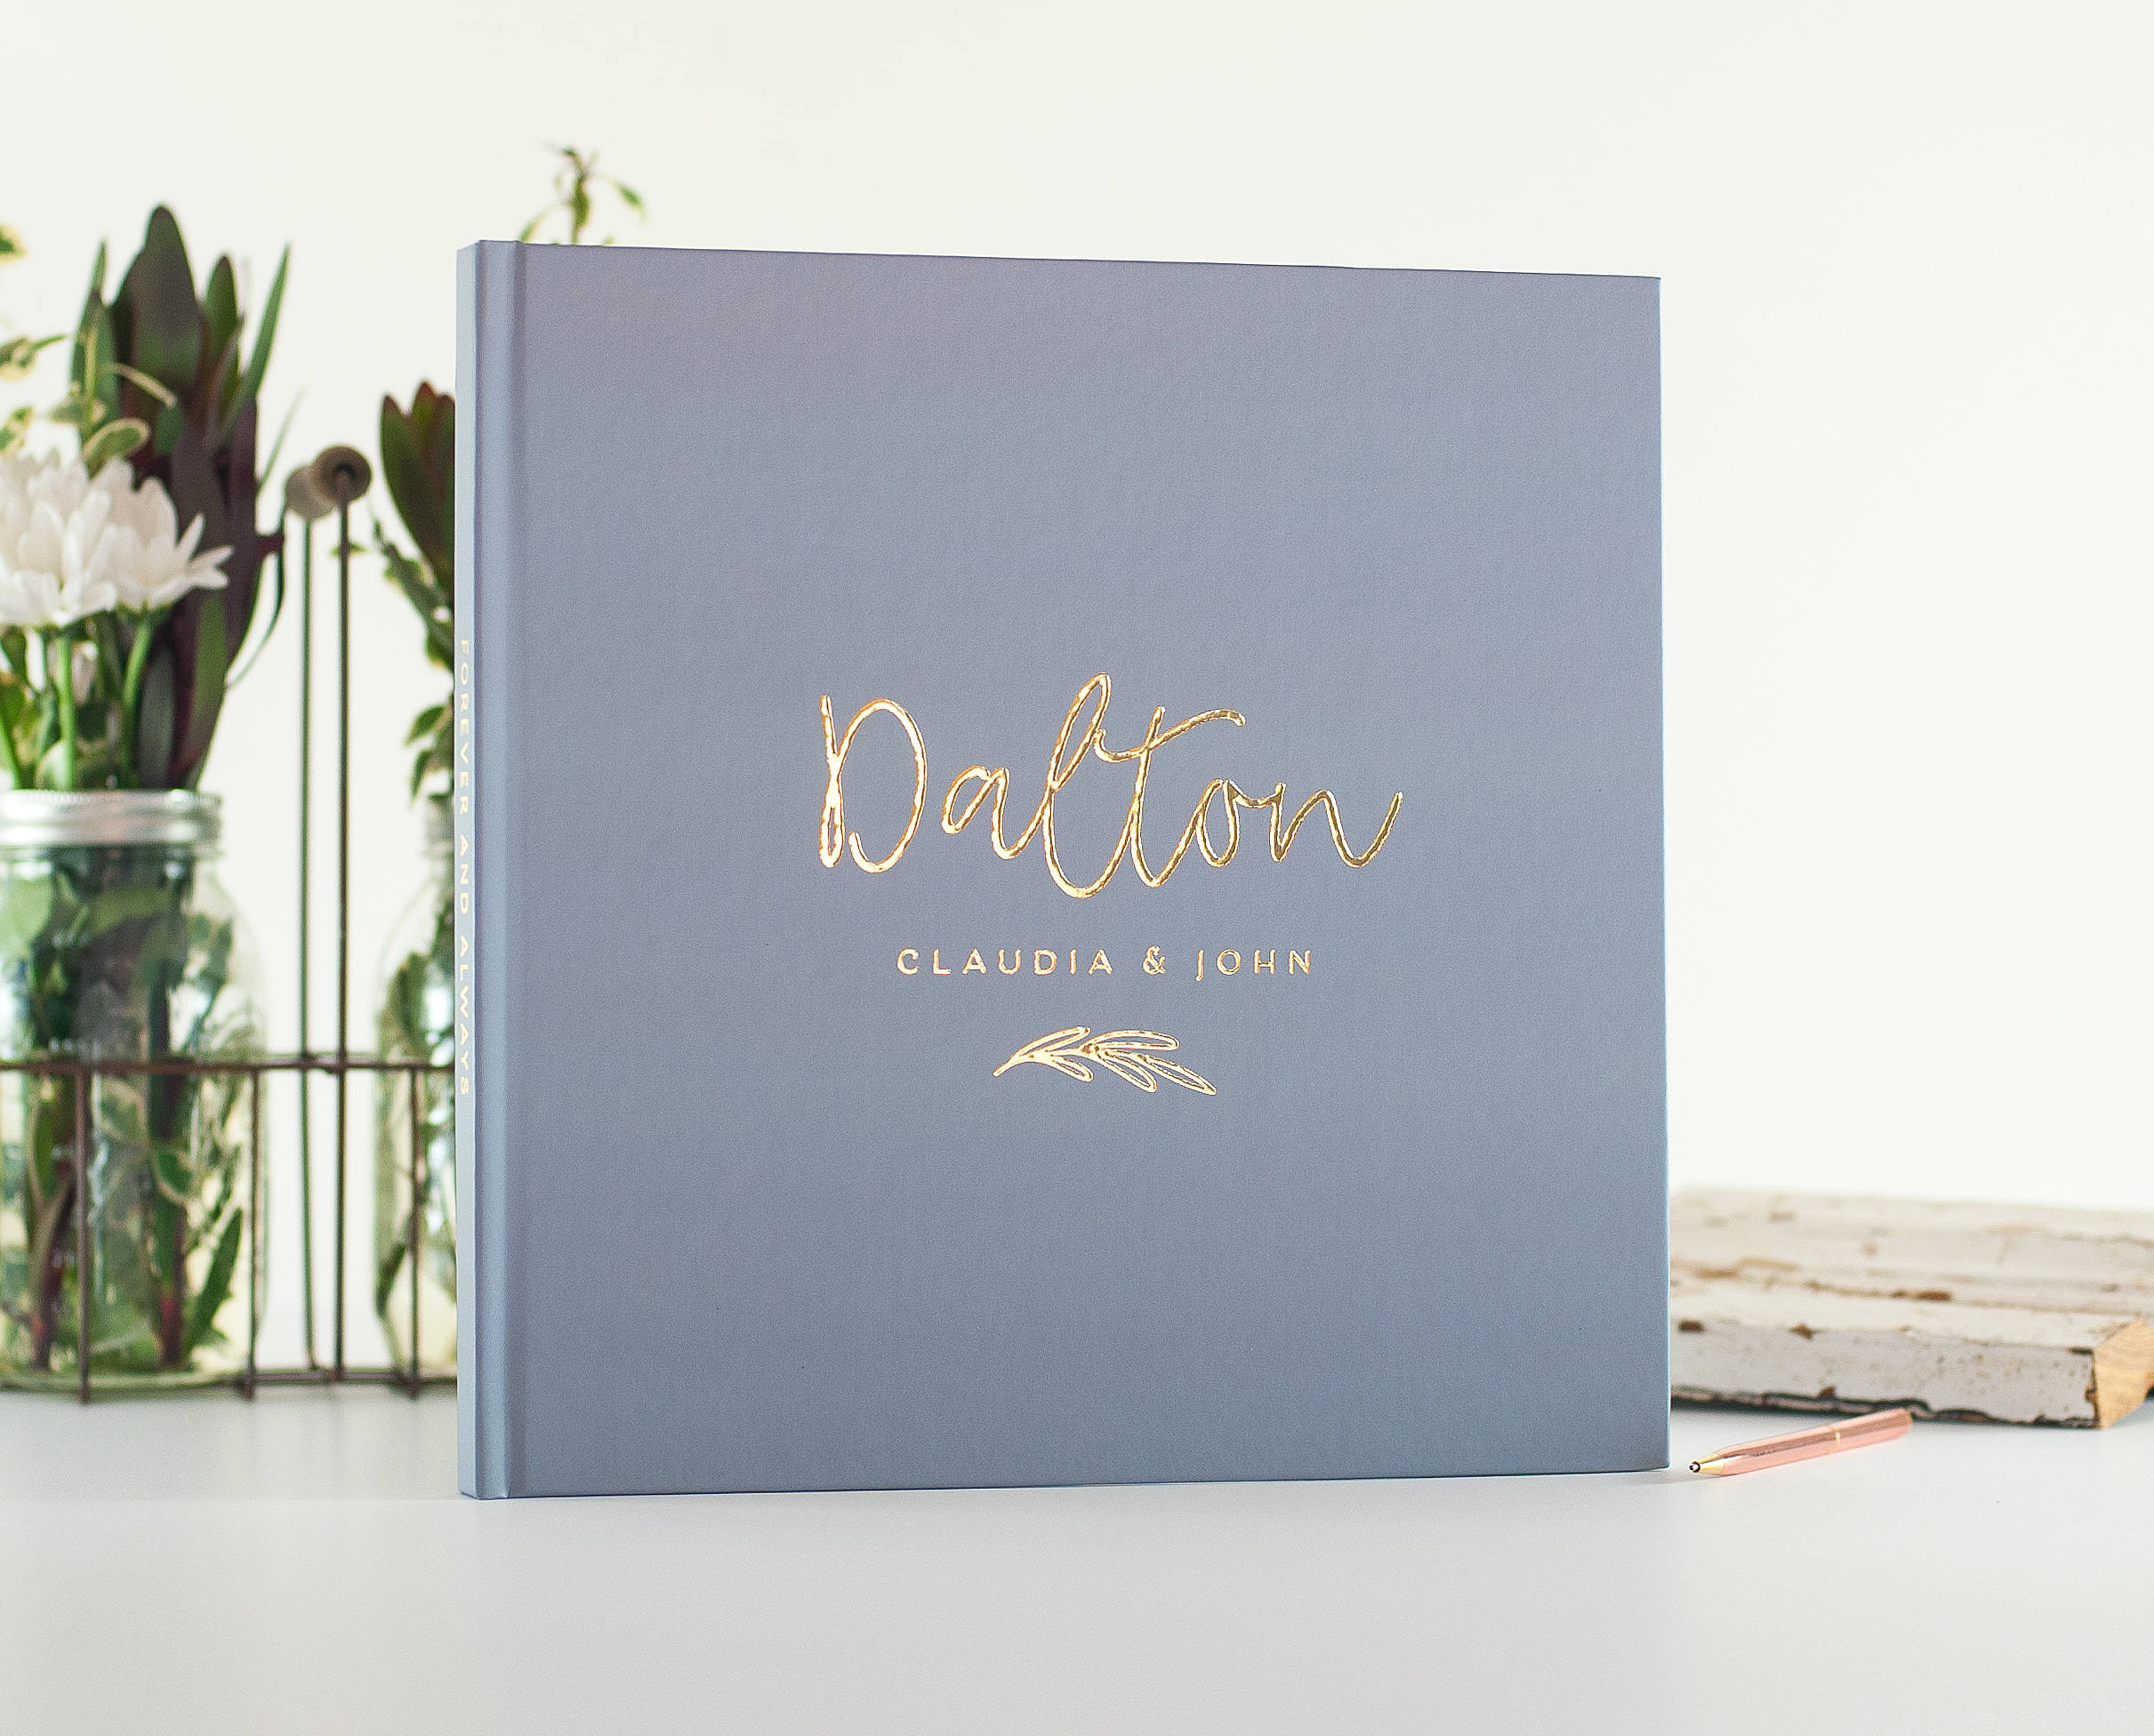 Wedding Guest Book For Photo Booth
 Dusty Blue Wedding Guest Book wedding guestbook wedding